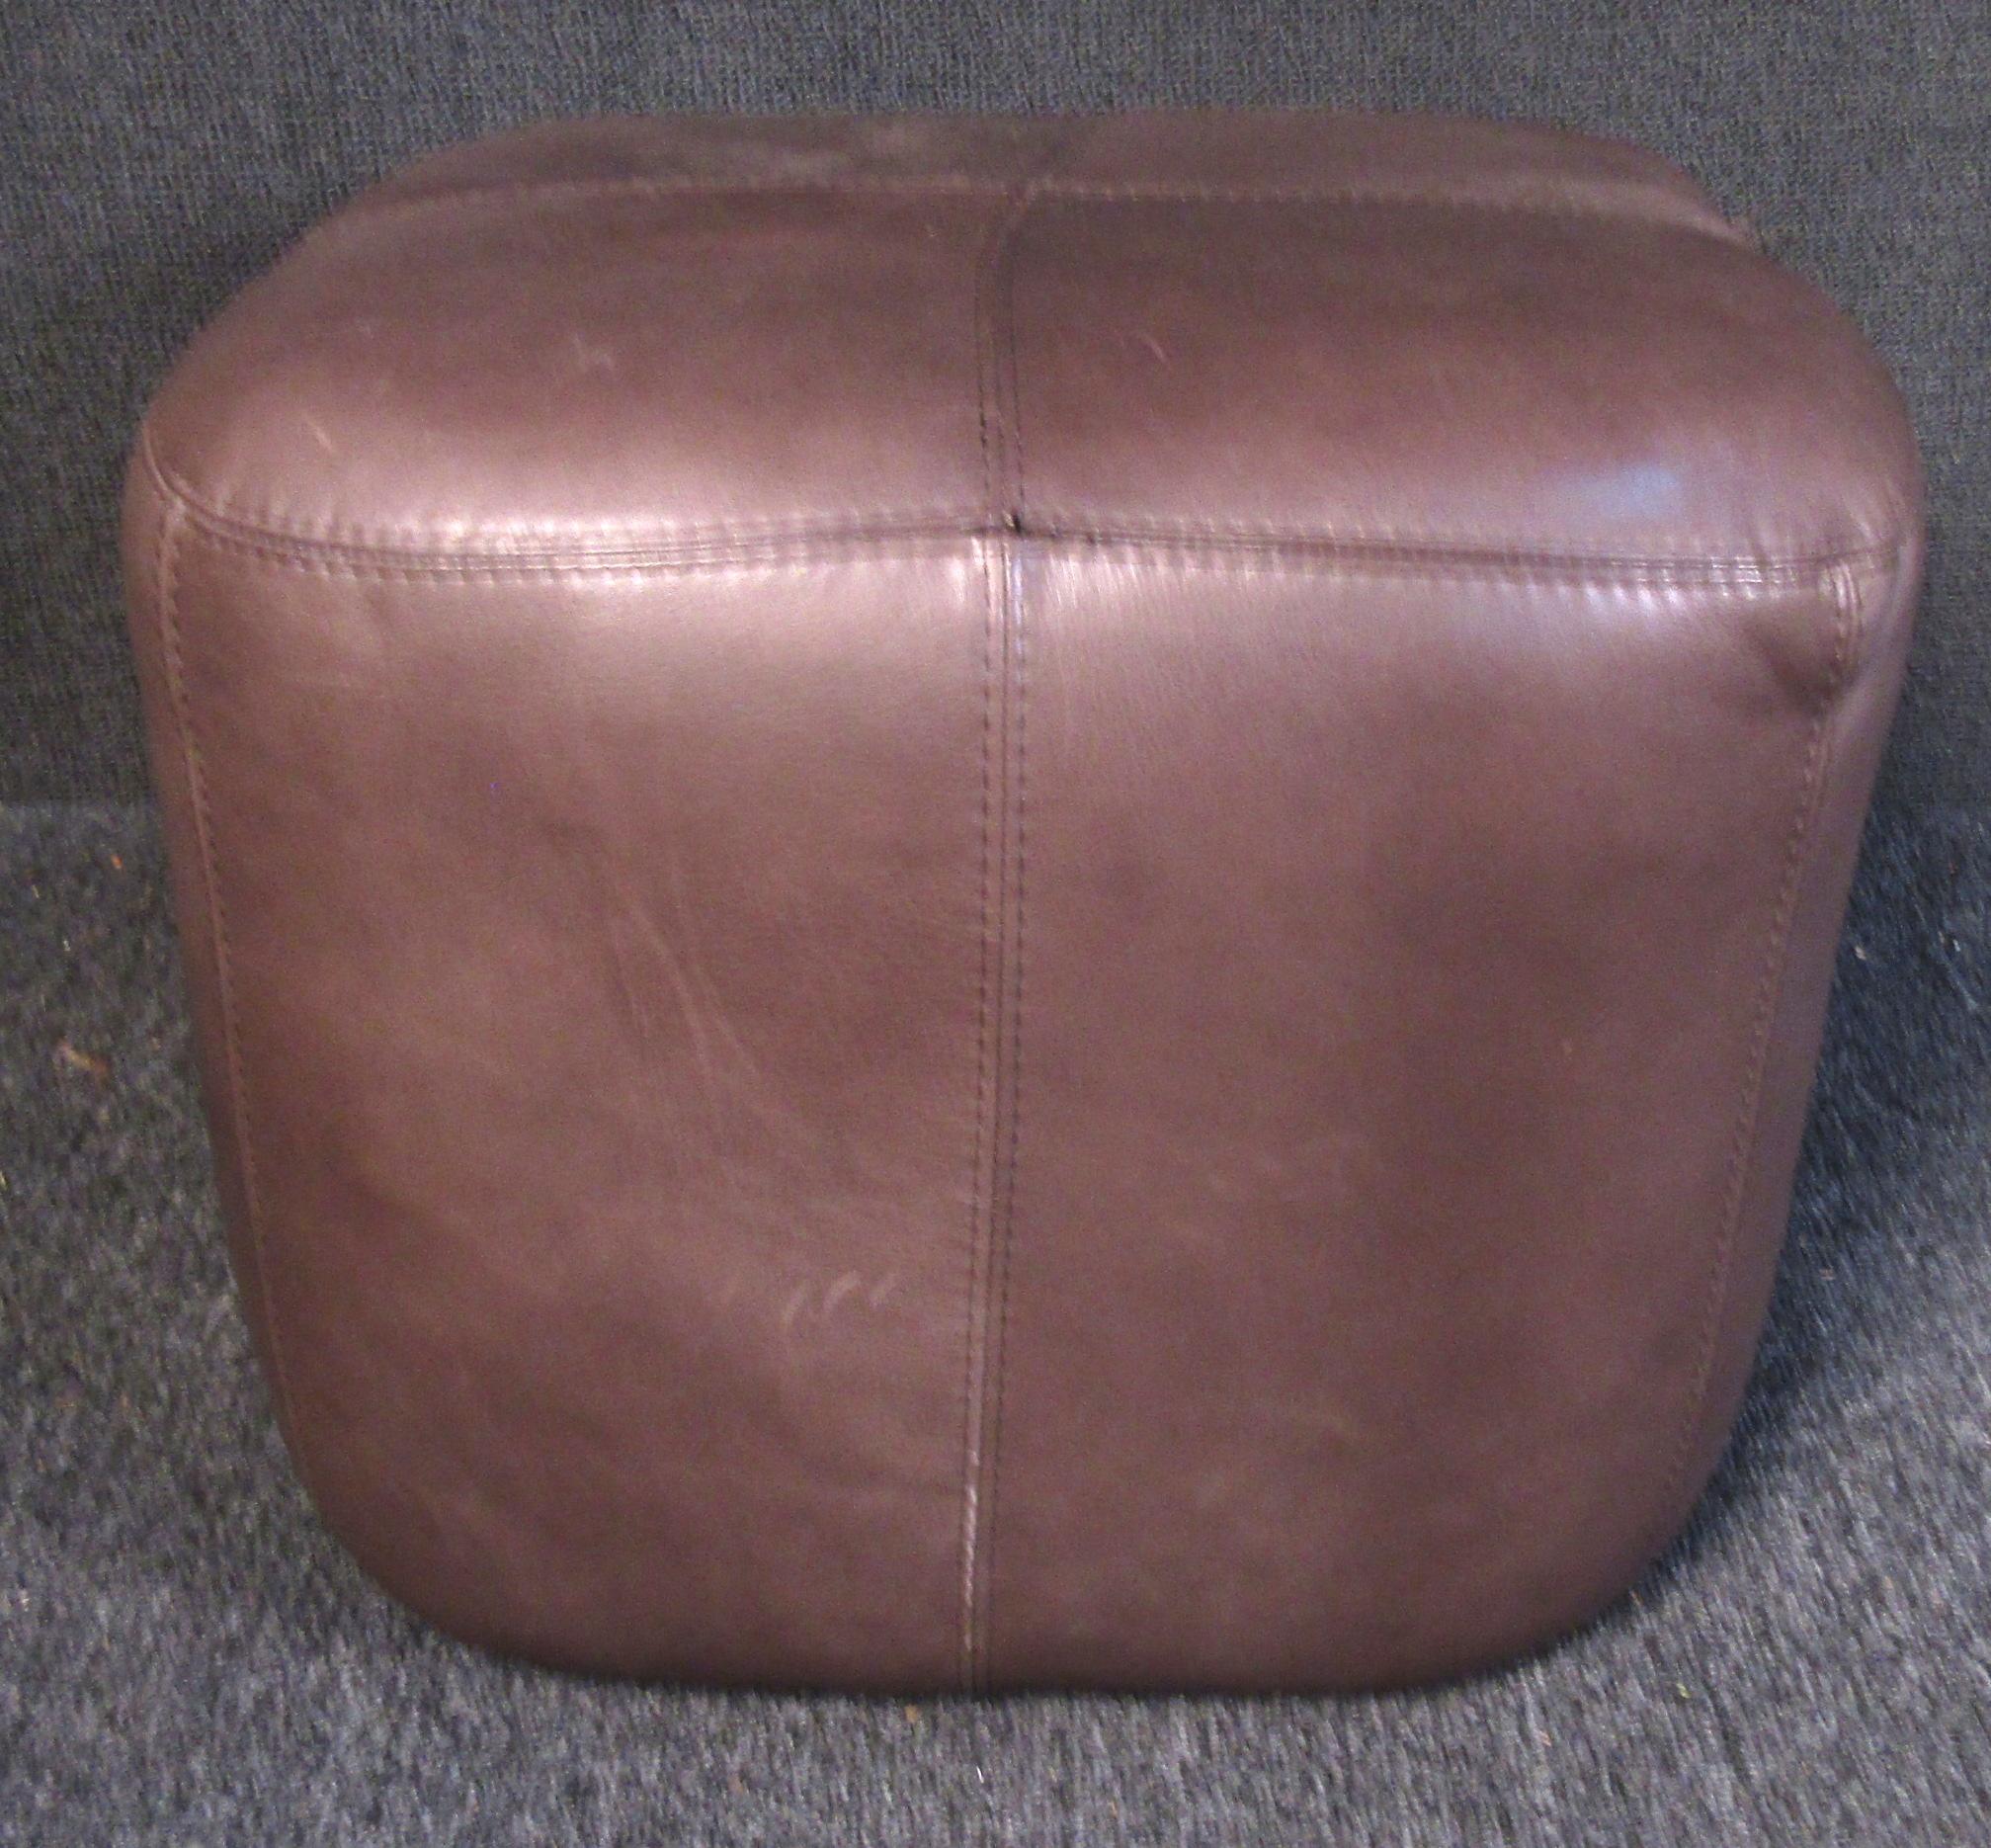 Plush vintage modern ottoman upholstered in a rich brown leather. Versatile size and shape allows it to be used traditionally as an ottoman, as a side chair, or even as a coffee table.

Please confirm item location (NY or NJ).